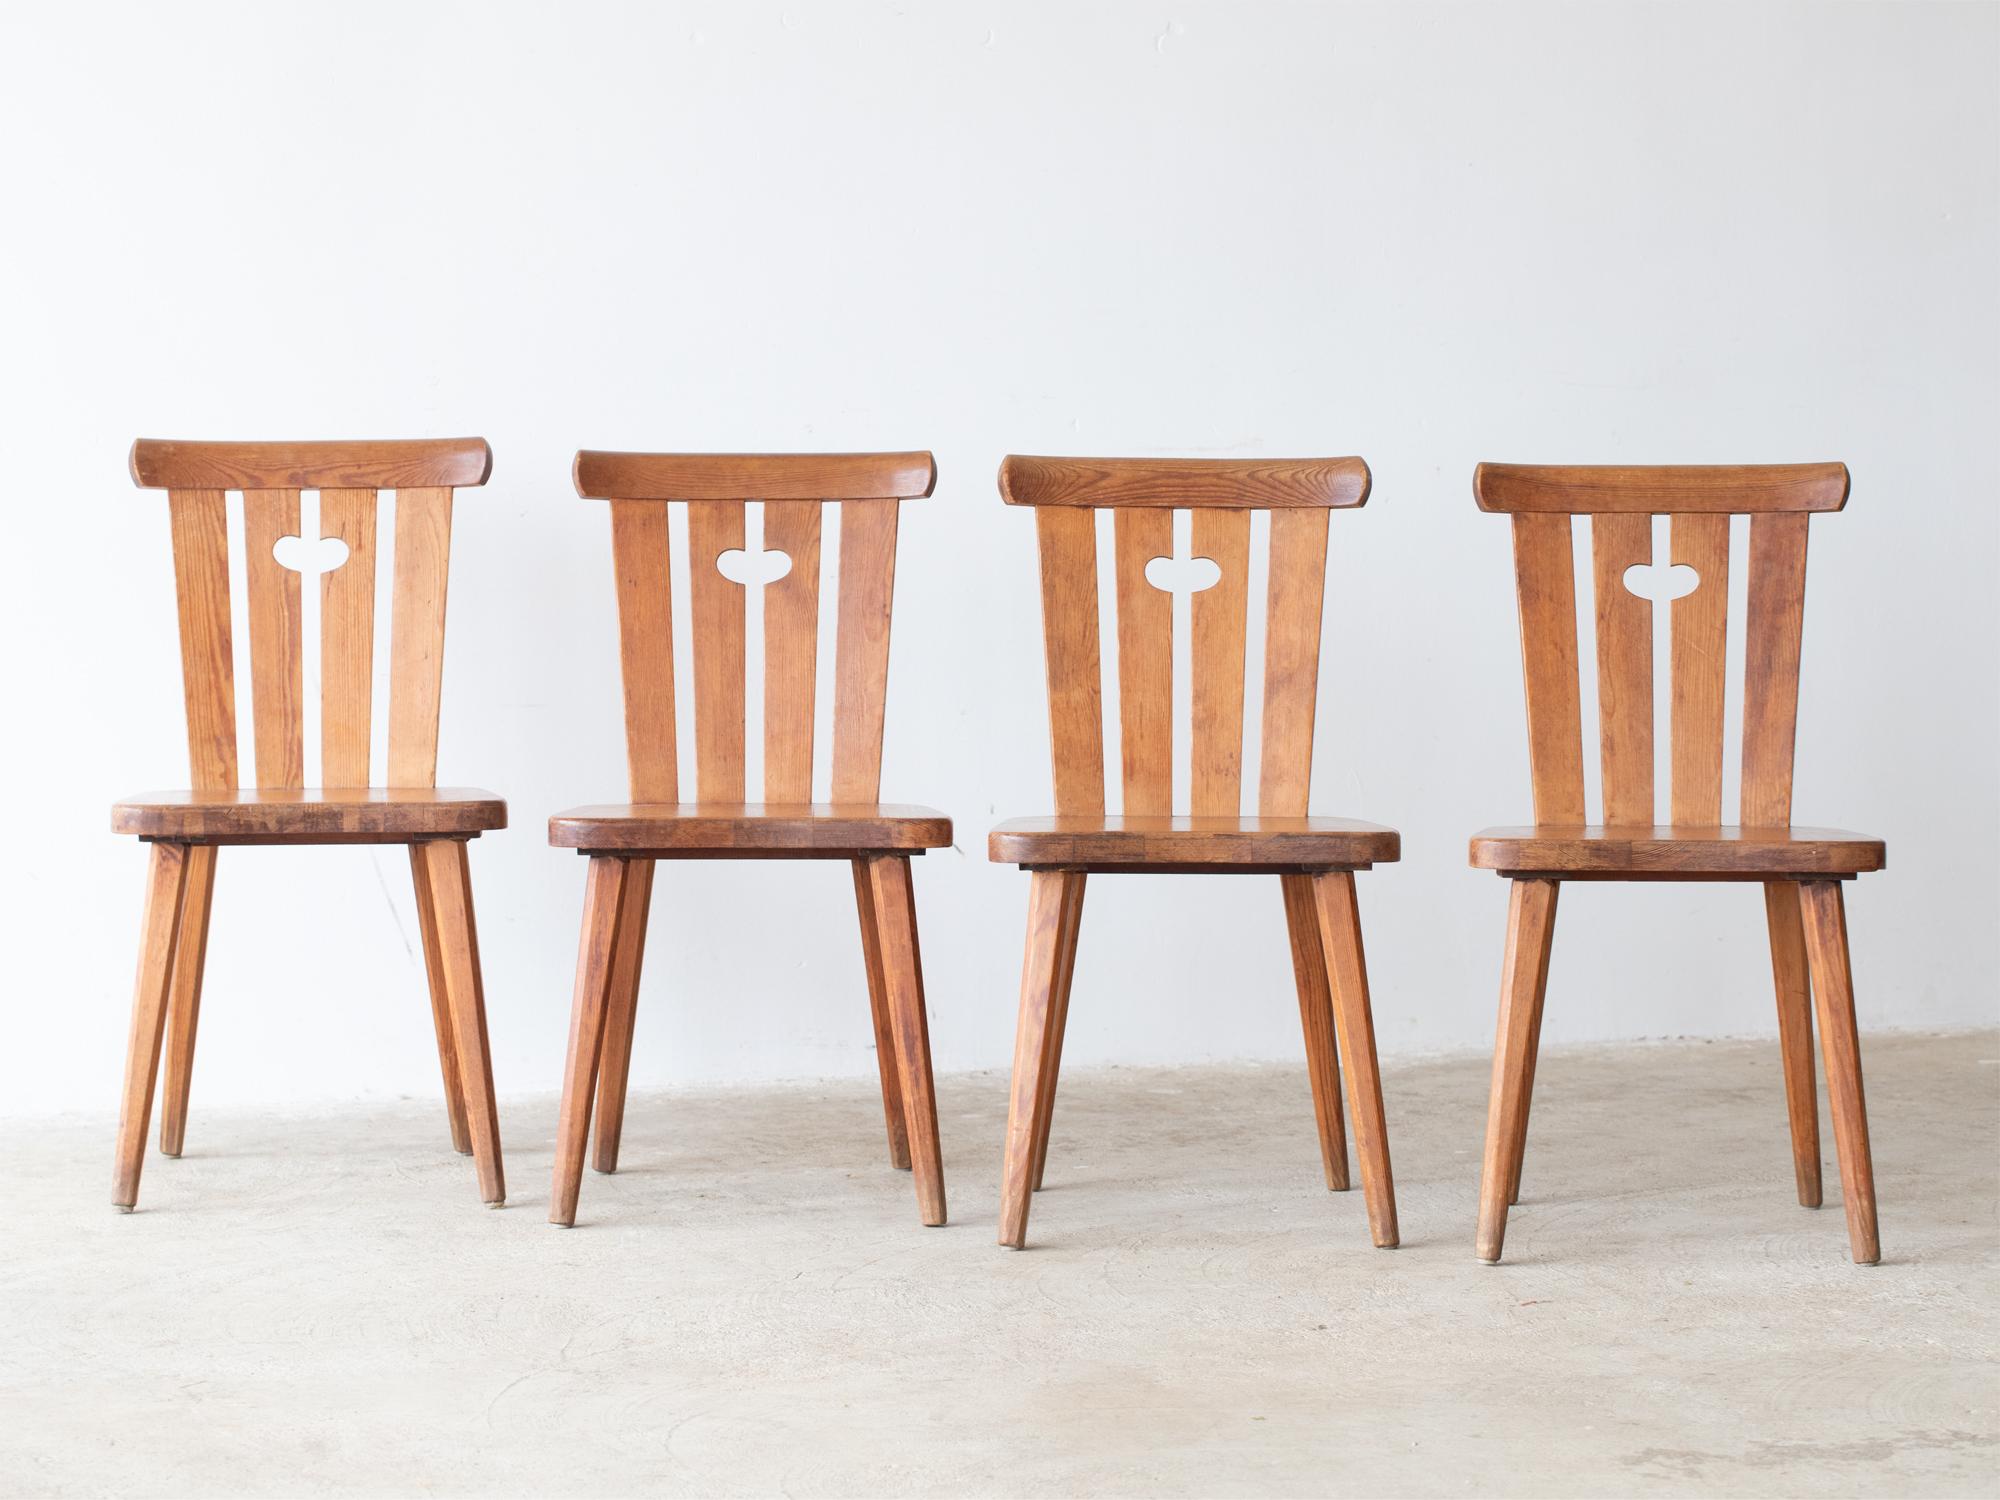 A set of four mid-century pine dining chairs by Göran Malmvall. Swedish, c. 1960s.

Stock ref. #2222

Sturdy frames with light cosmetic wear.

80.5 x 45.5 x 43.5 cm (31.7 x 17.9 x 17.1 